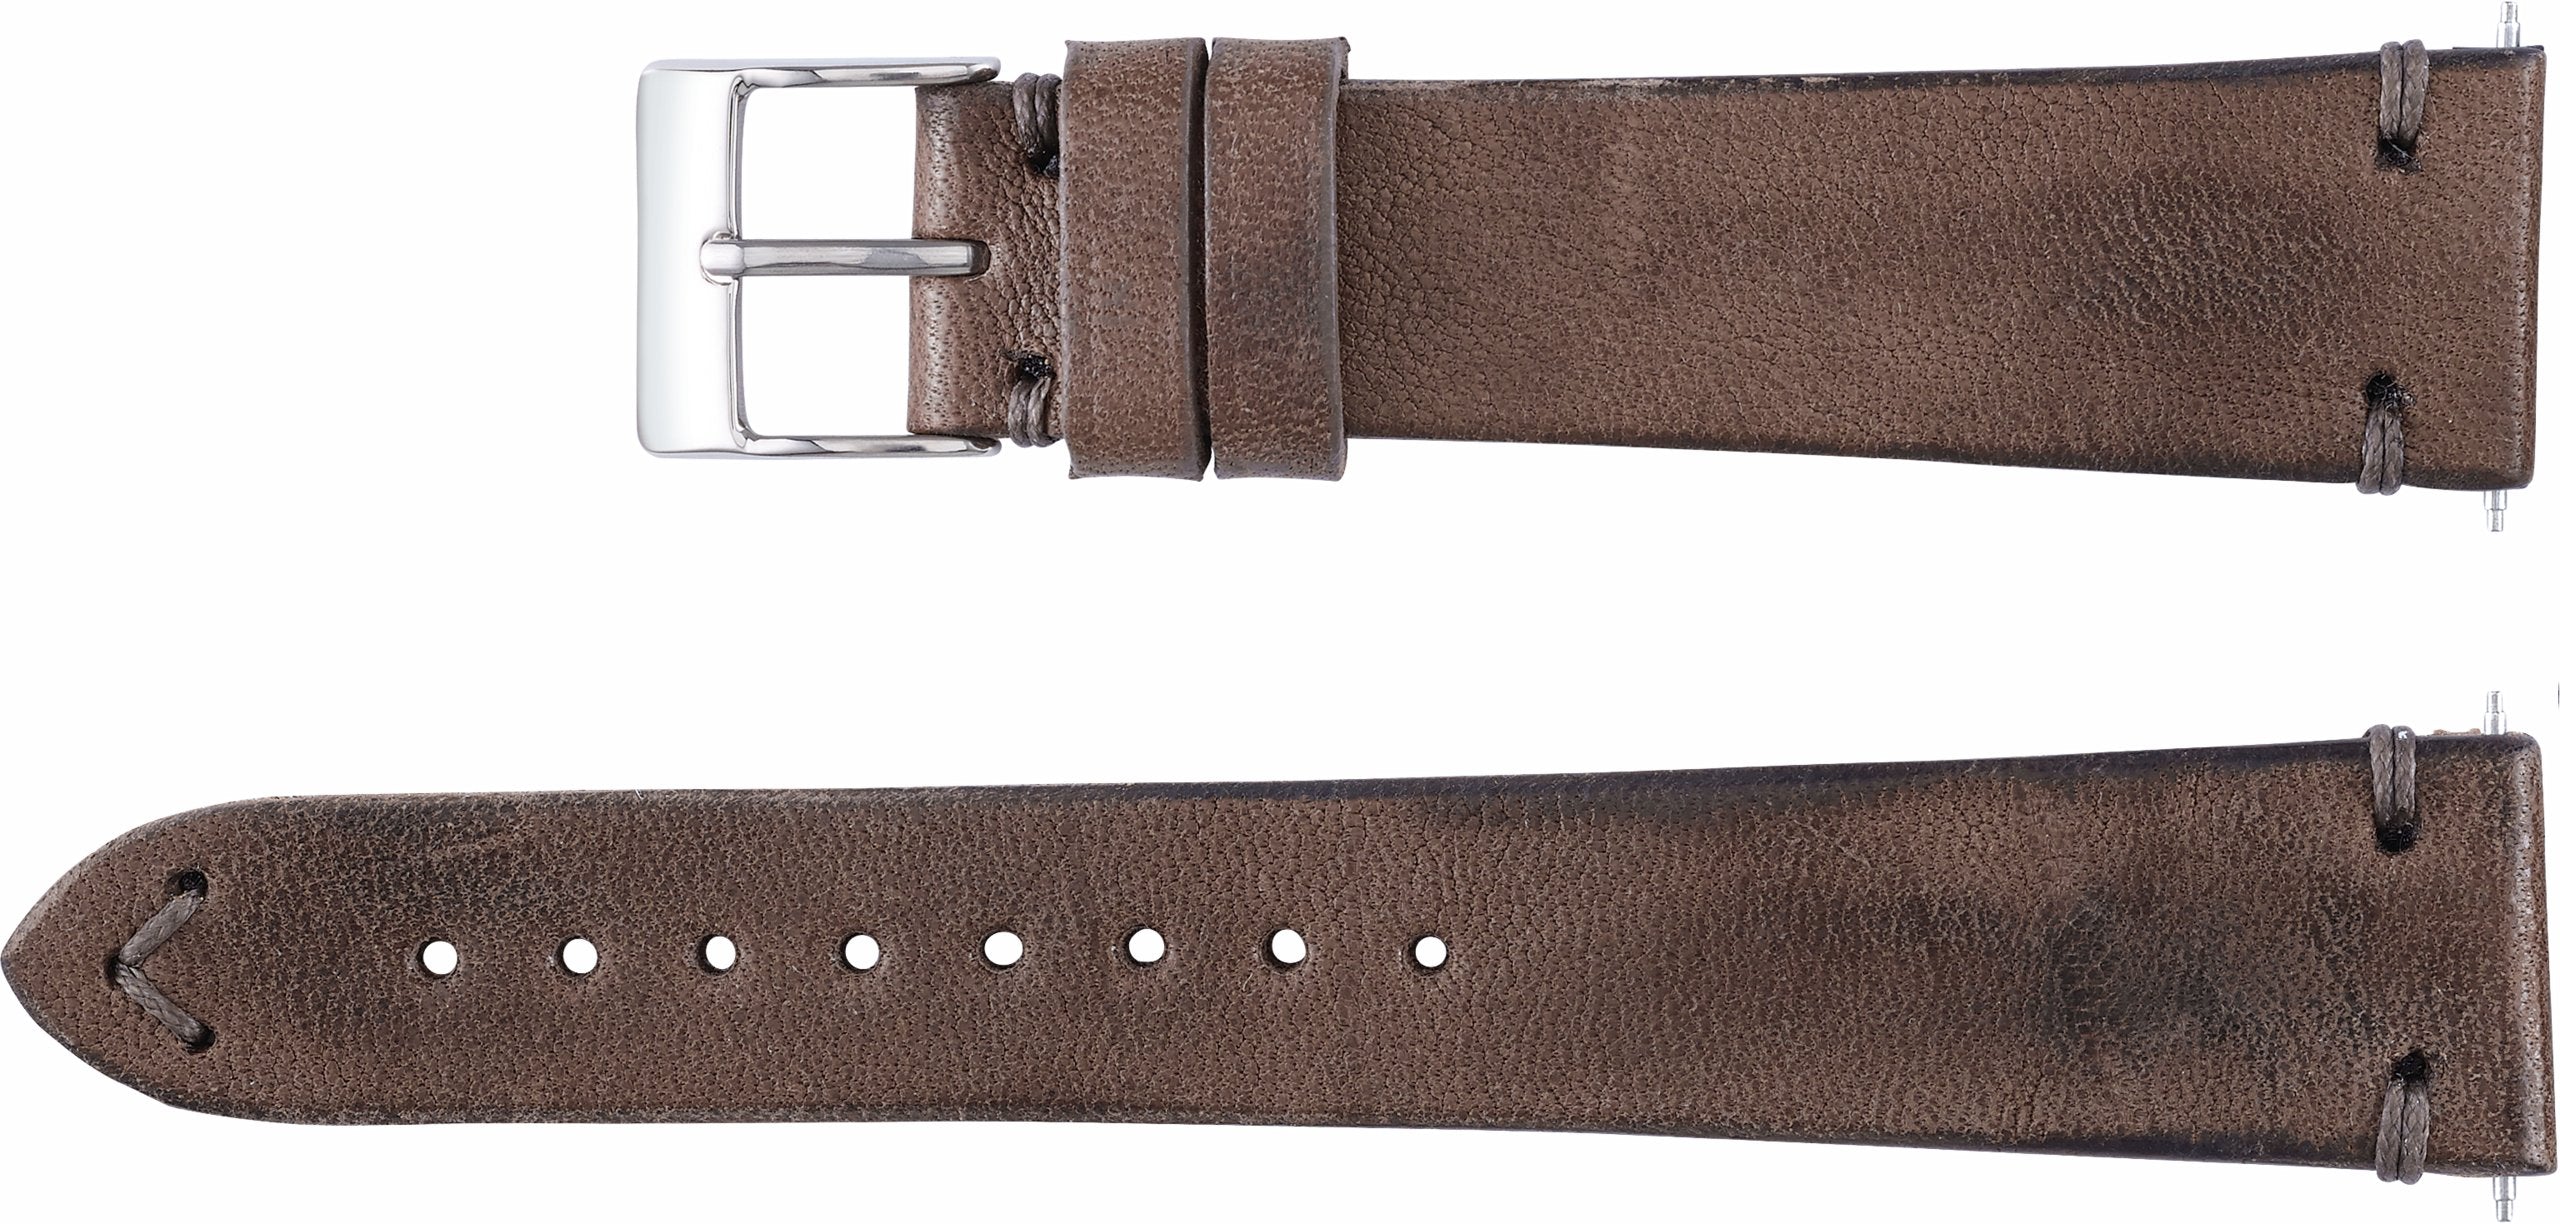 Men's Vintage-Inspired Leather Watch Band